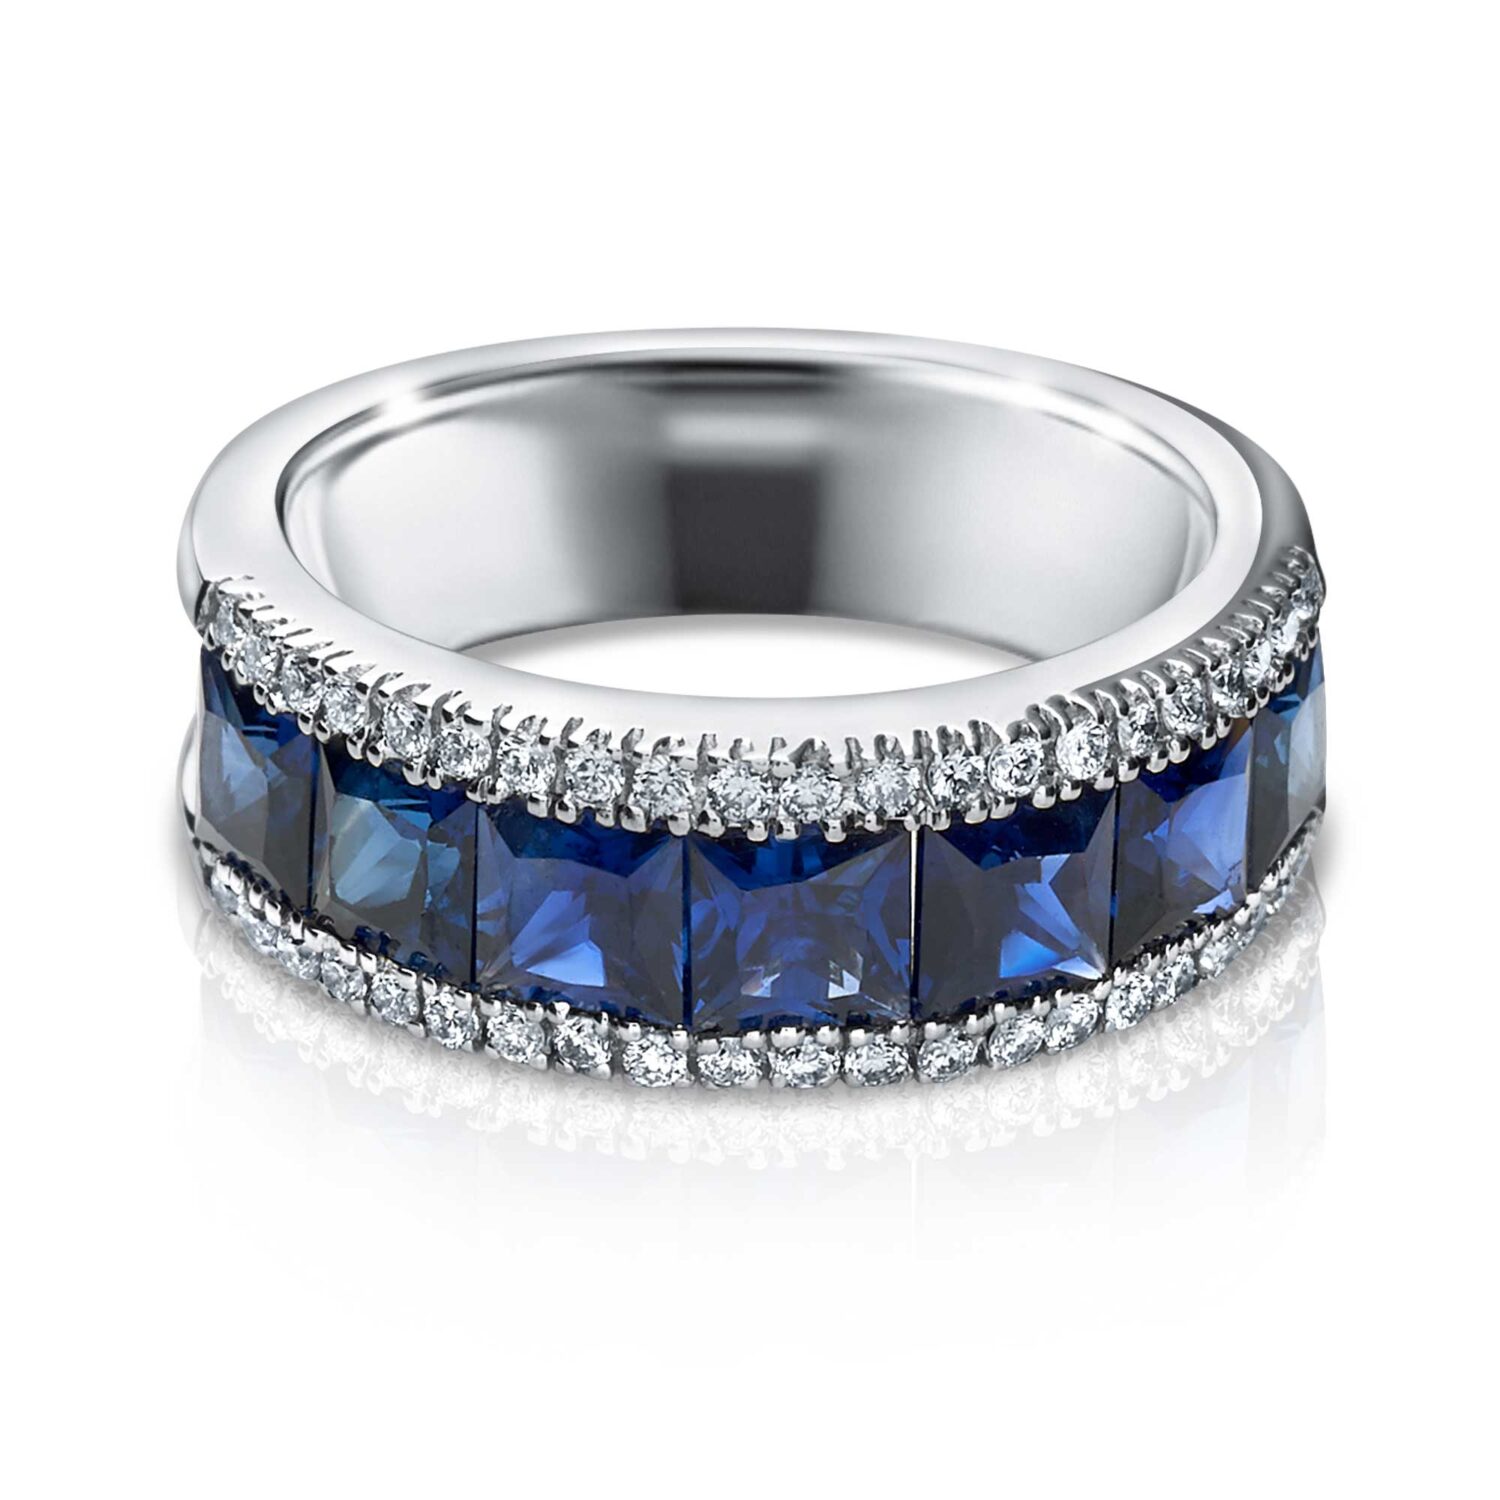 Husar's House of Fine Diamonds. 14Kt. White Gold Vintage Style Princess Cut  Sapphire and Round Diamond Ring